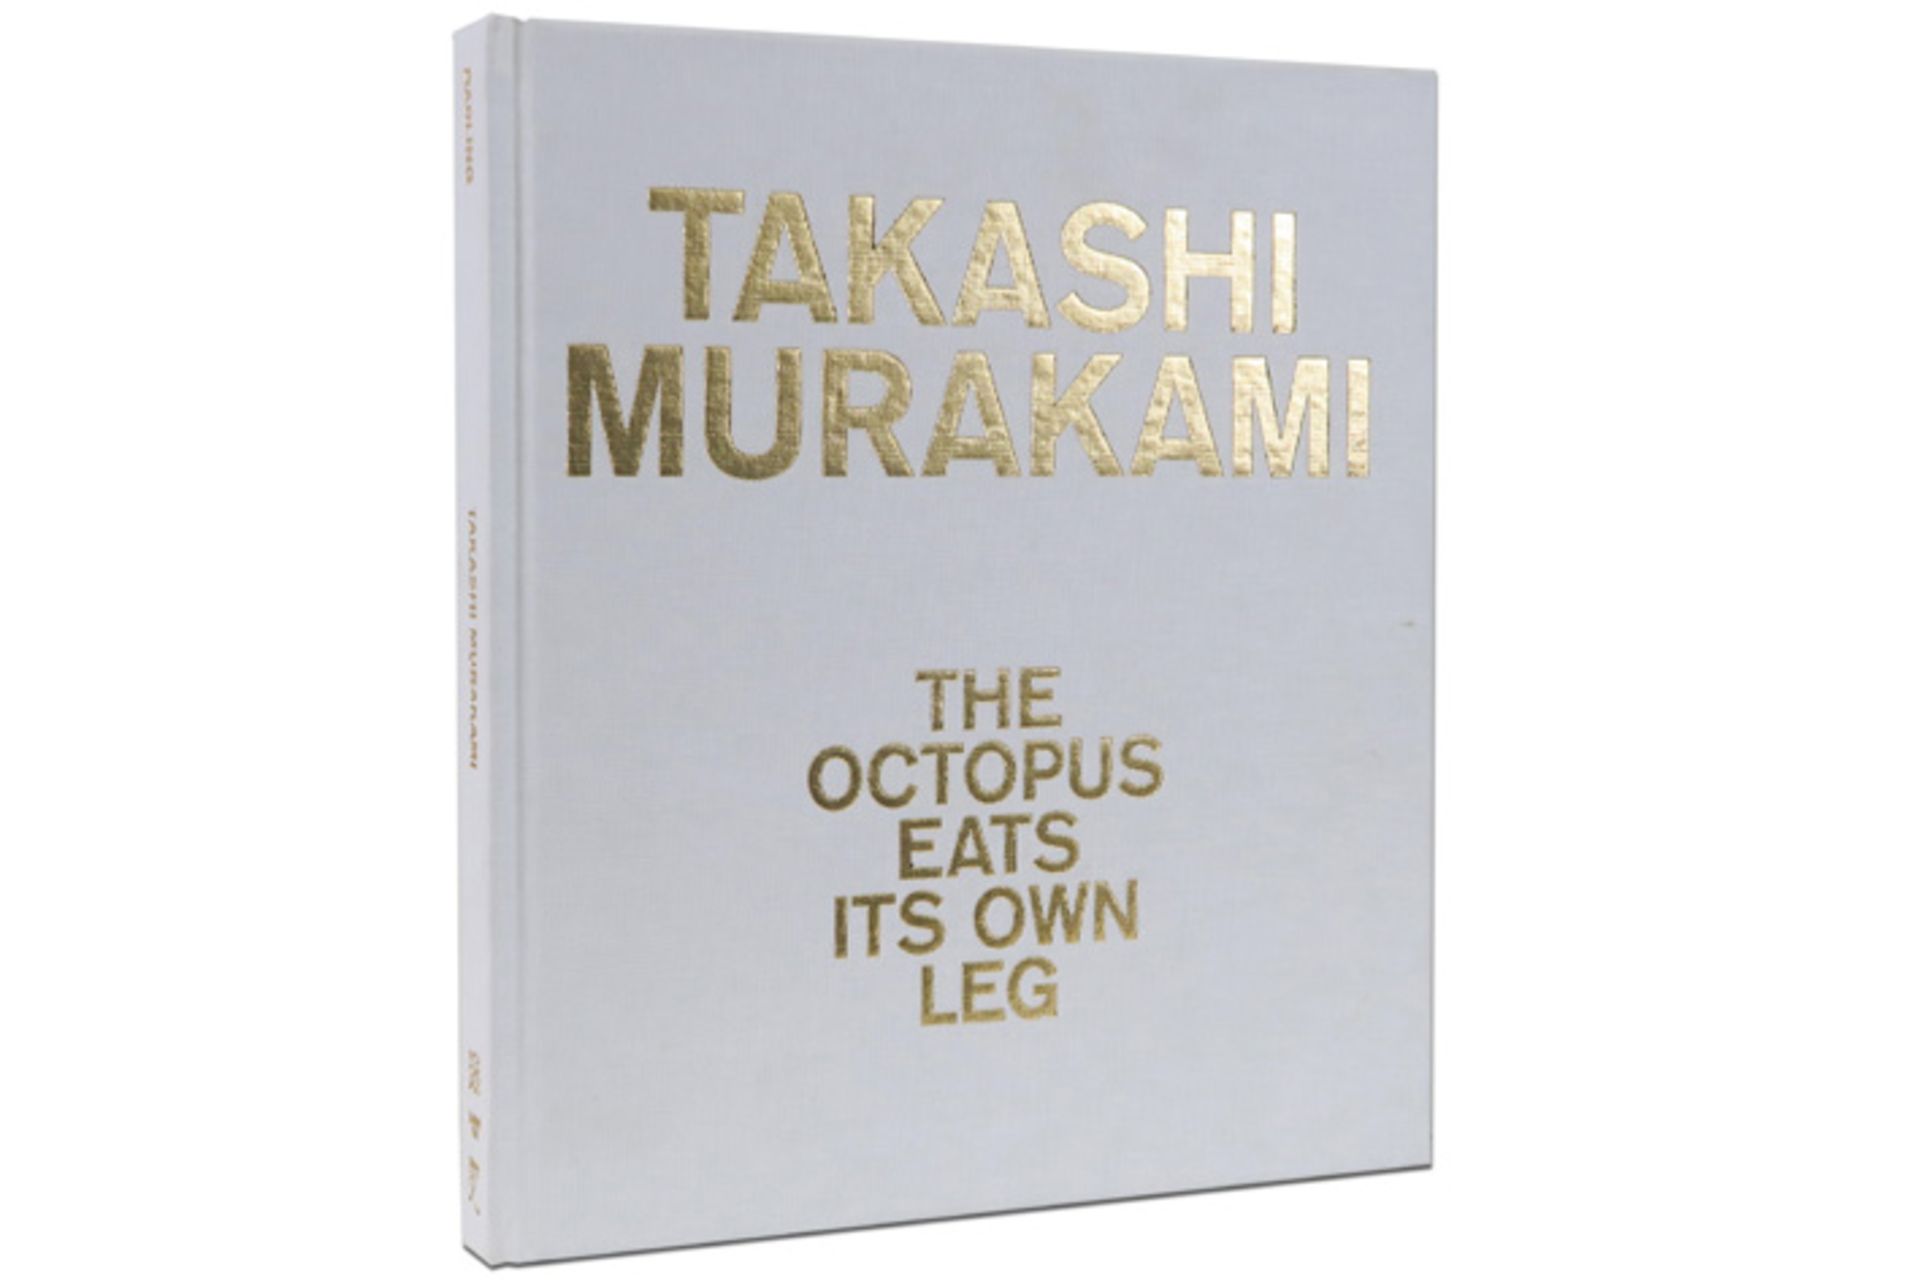 signed Takashi Murakami drawing - sold with a copy of the book "The Octopus eats its own leg" - Image 2 of 5